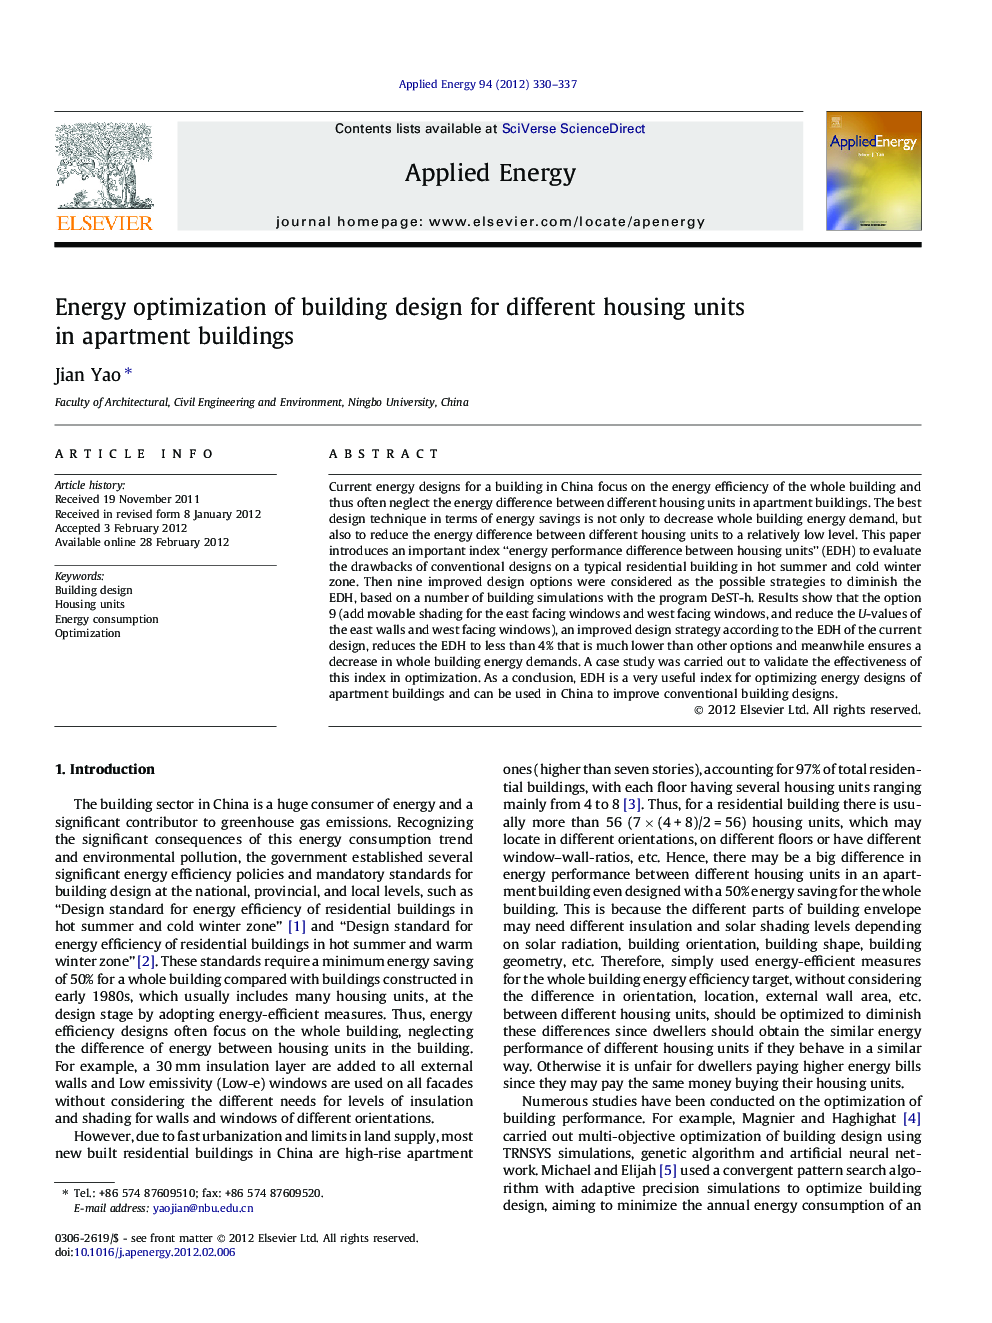 Energy optimization of building design for different housing units in apartment buildings